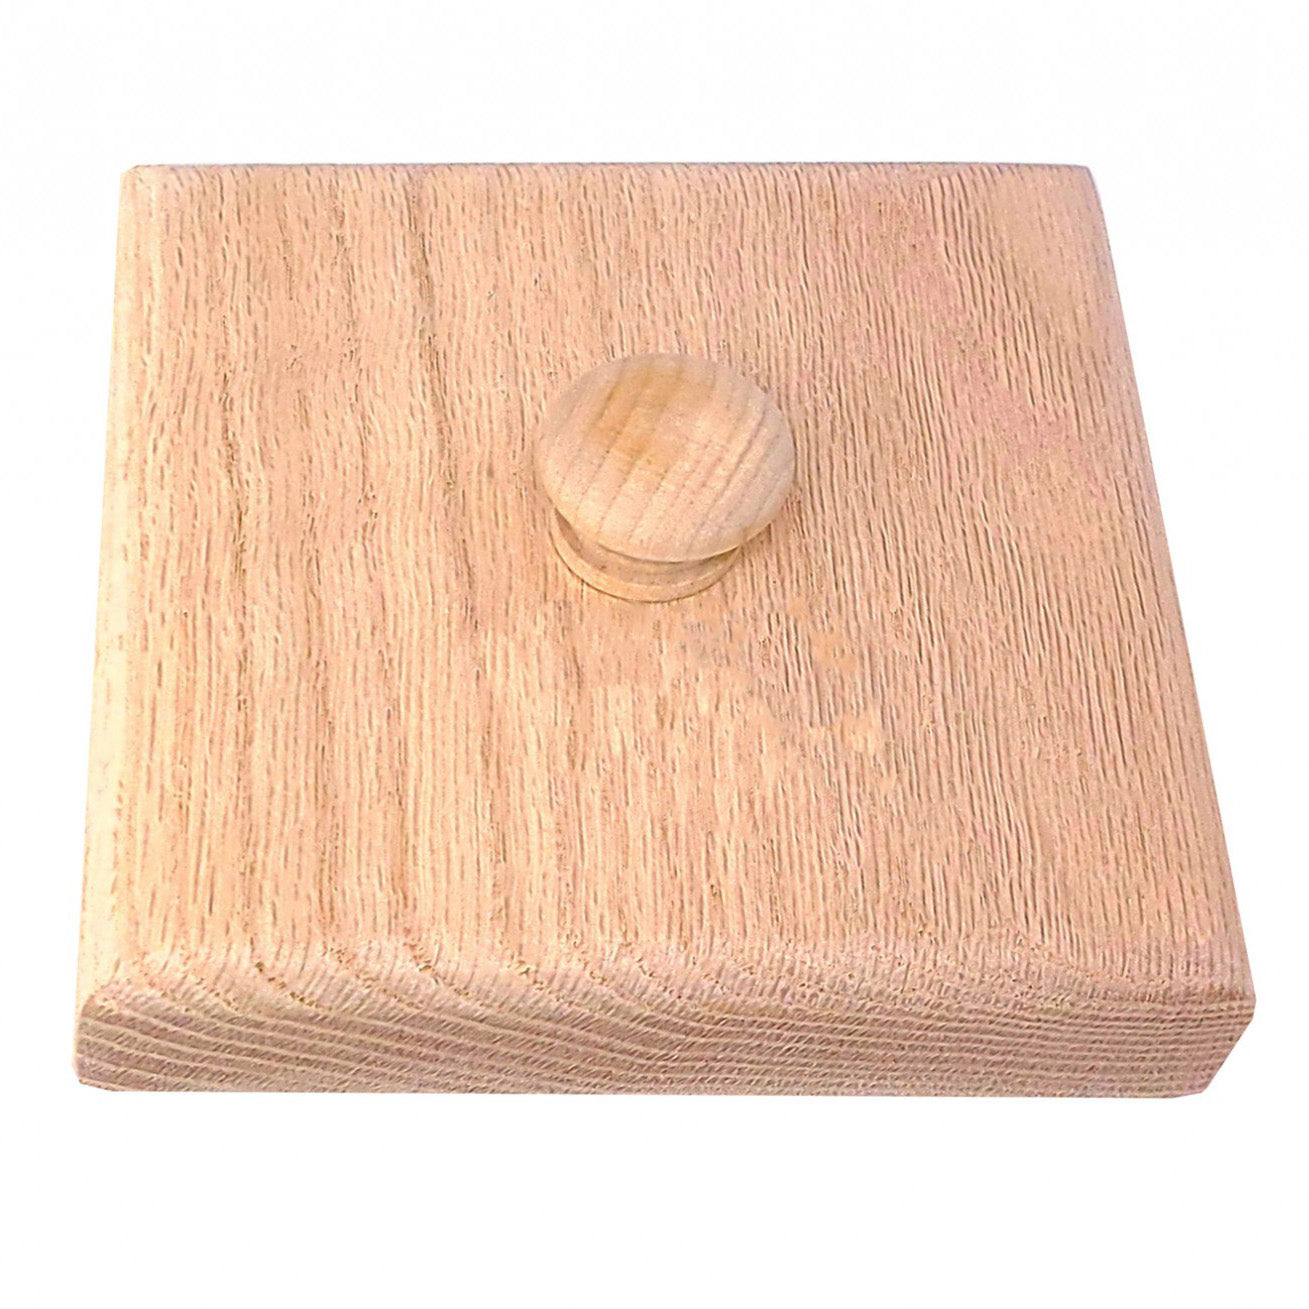 Quilter's Wood Clapper by Jackson Woodworks - 6